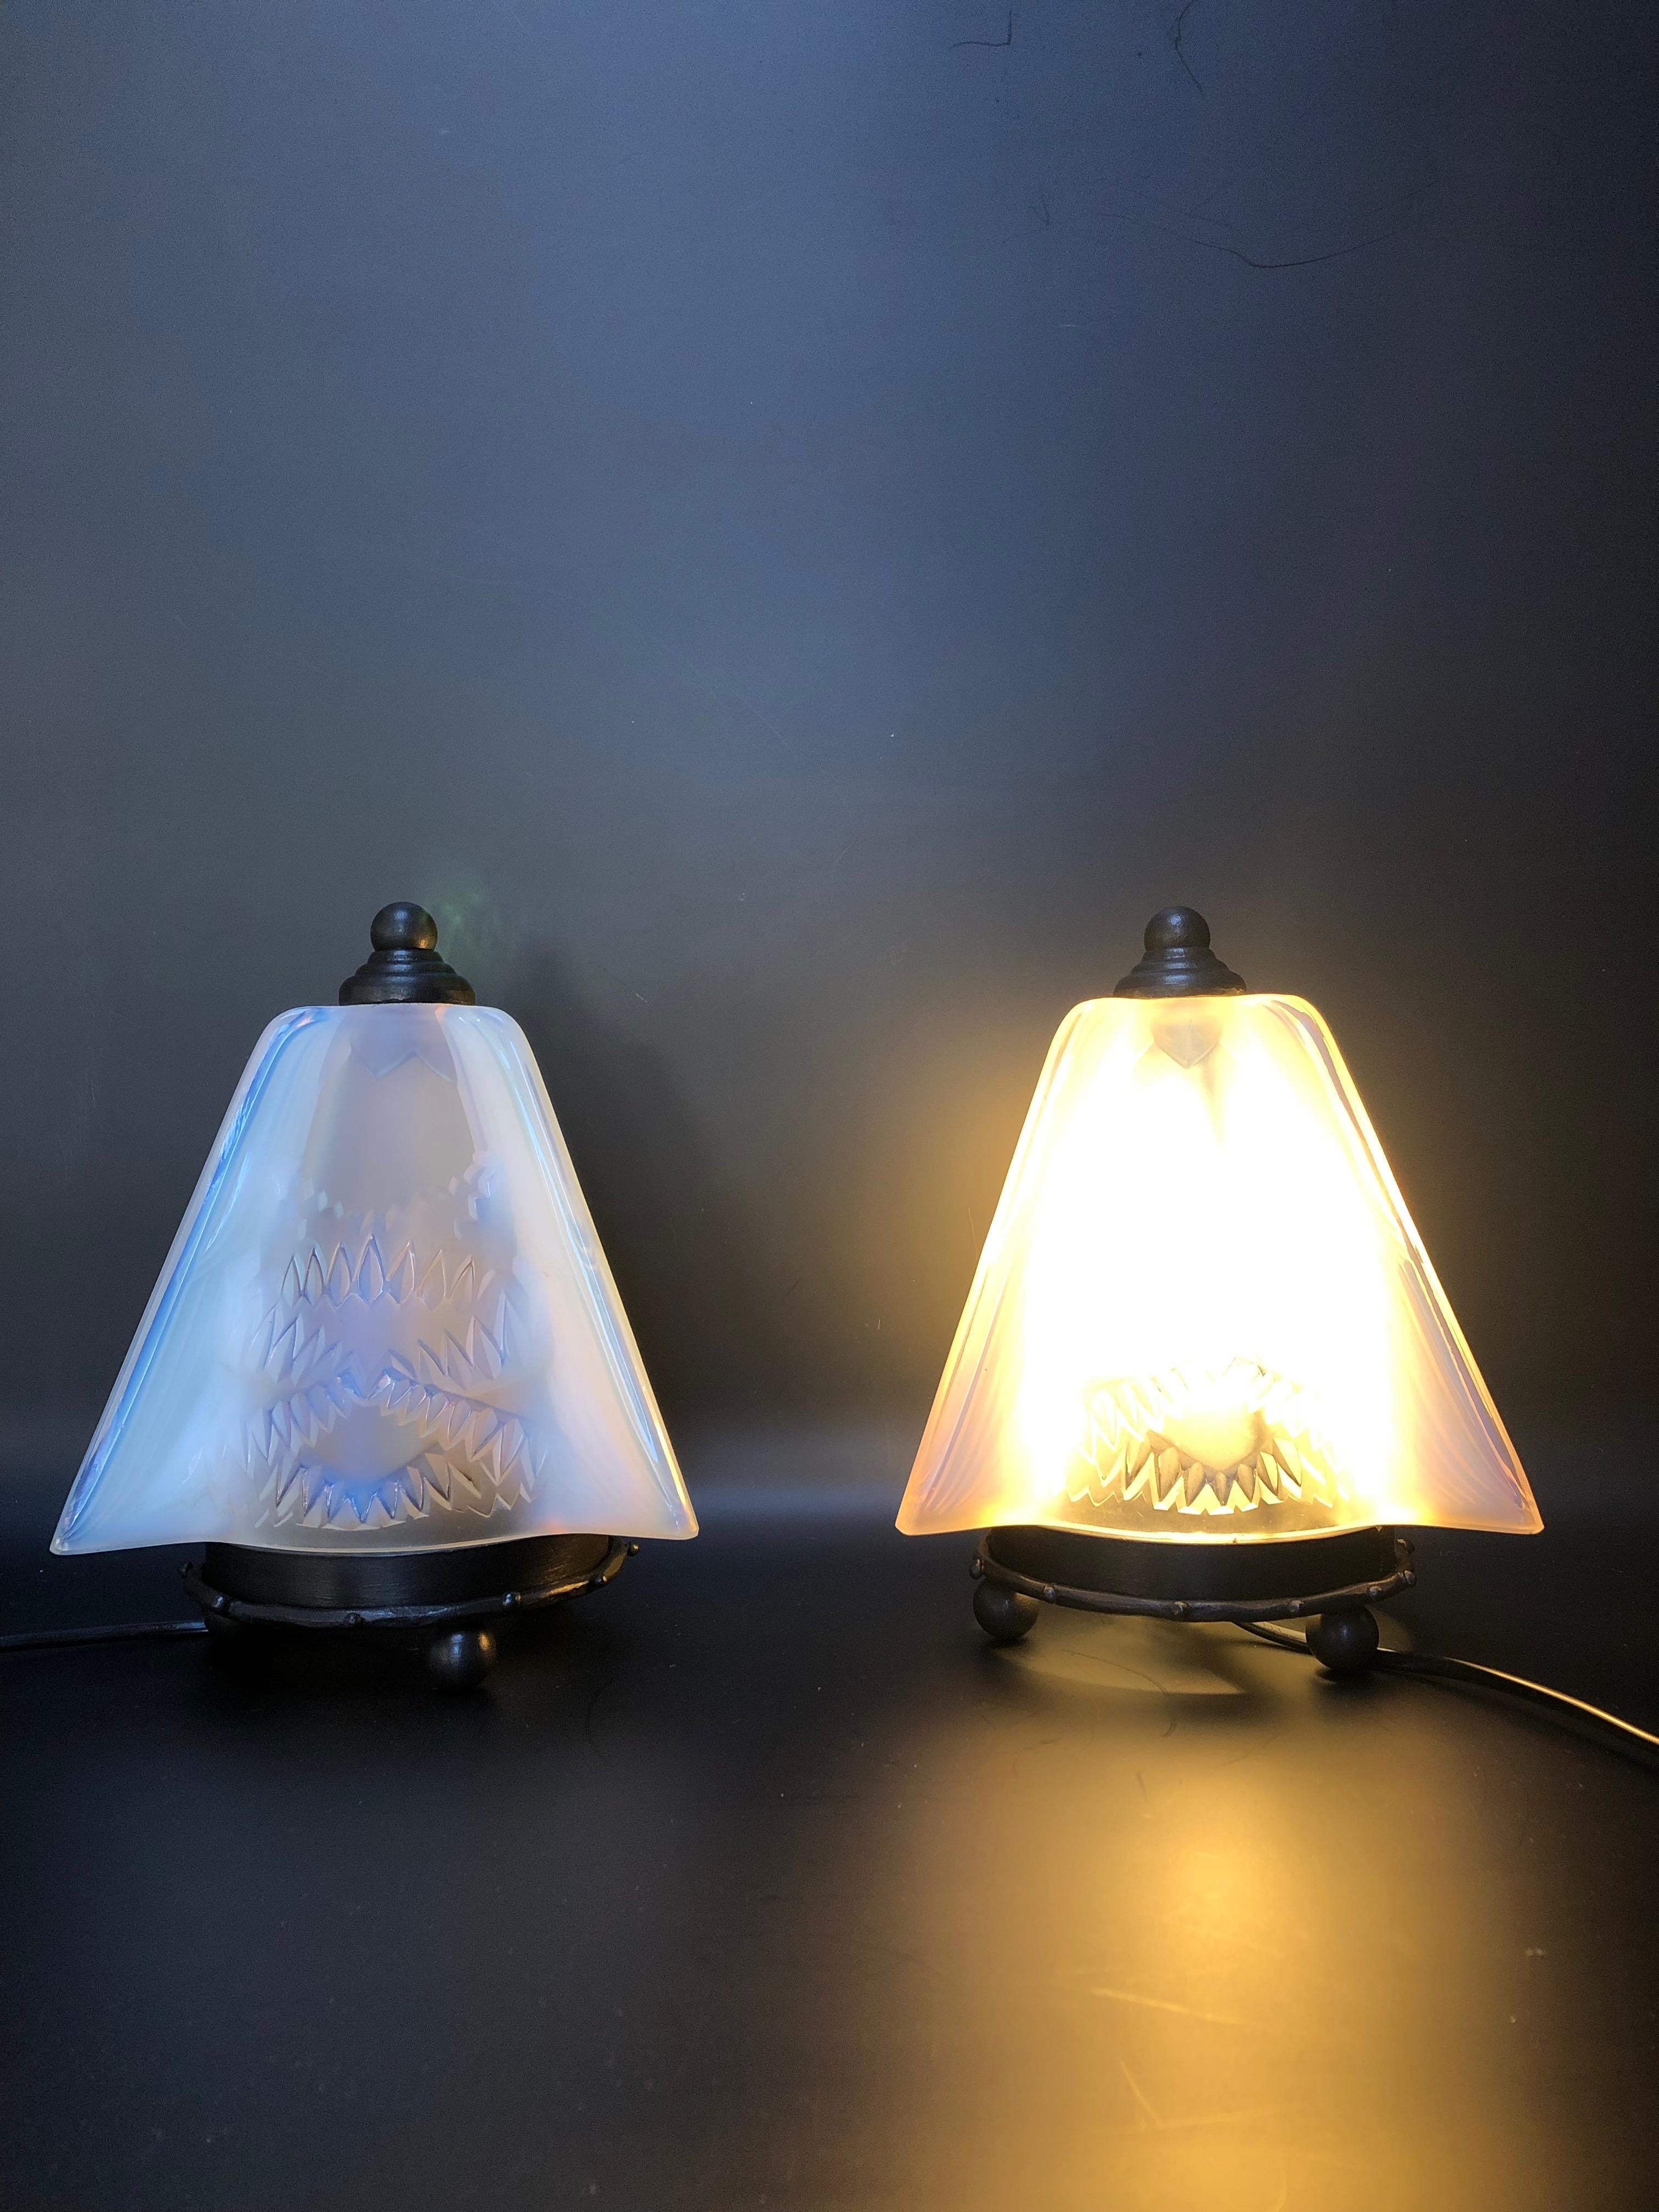 Pair of night lights circa 1930. Glassware in opalescent molded glass and wrought iron frame by Ranc Frères (unsigned).
Electrified and in perfect condition.
Height: 23cm
Base: 13cm
Weight: 4.5 Kg